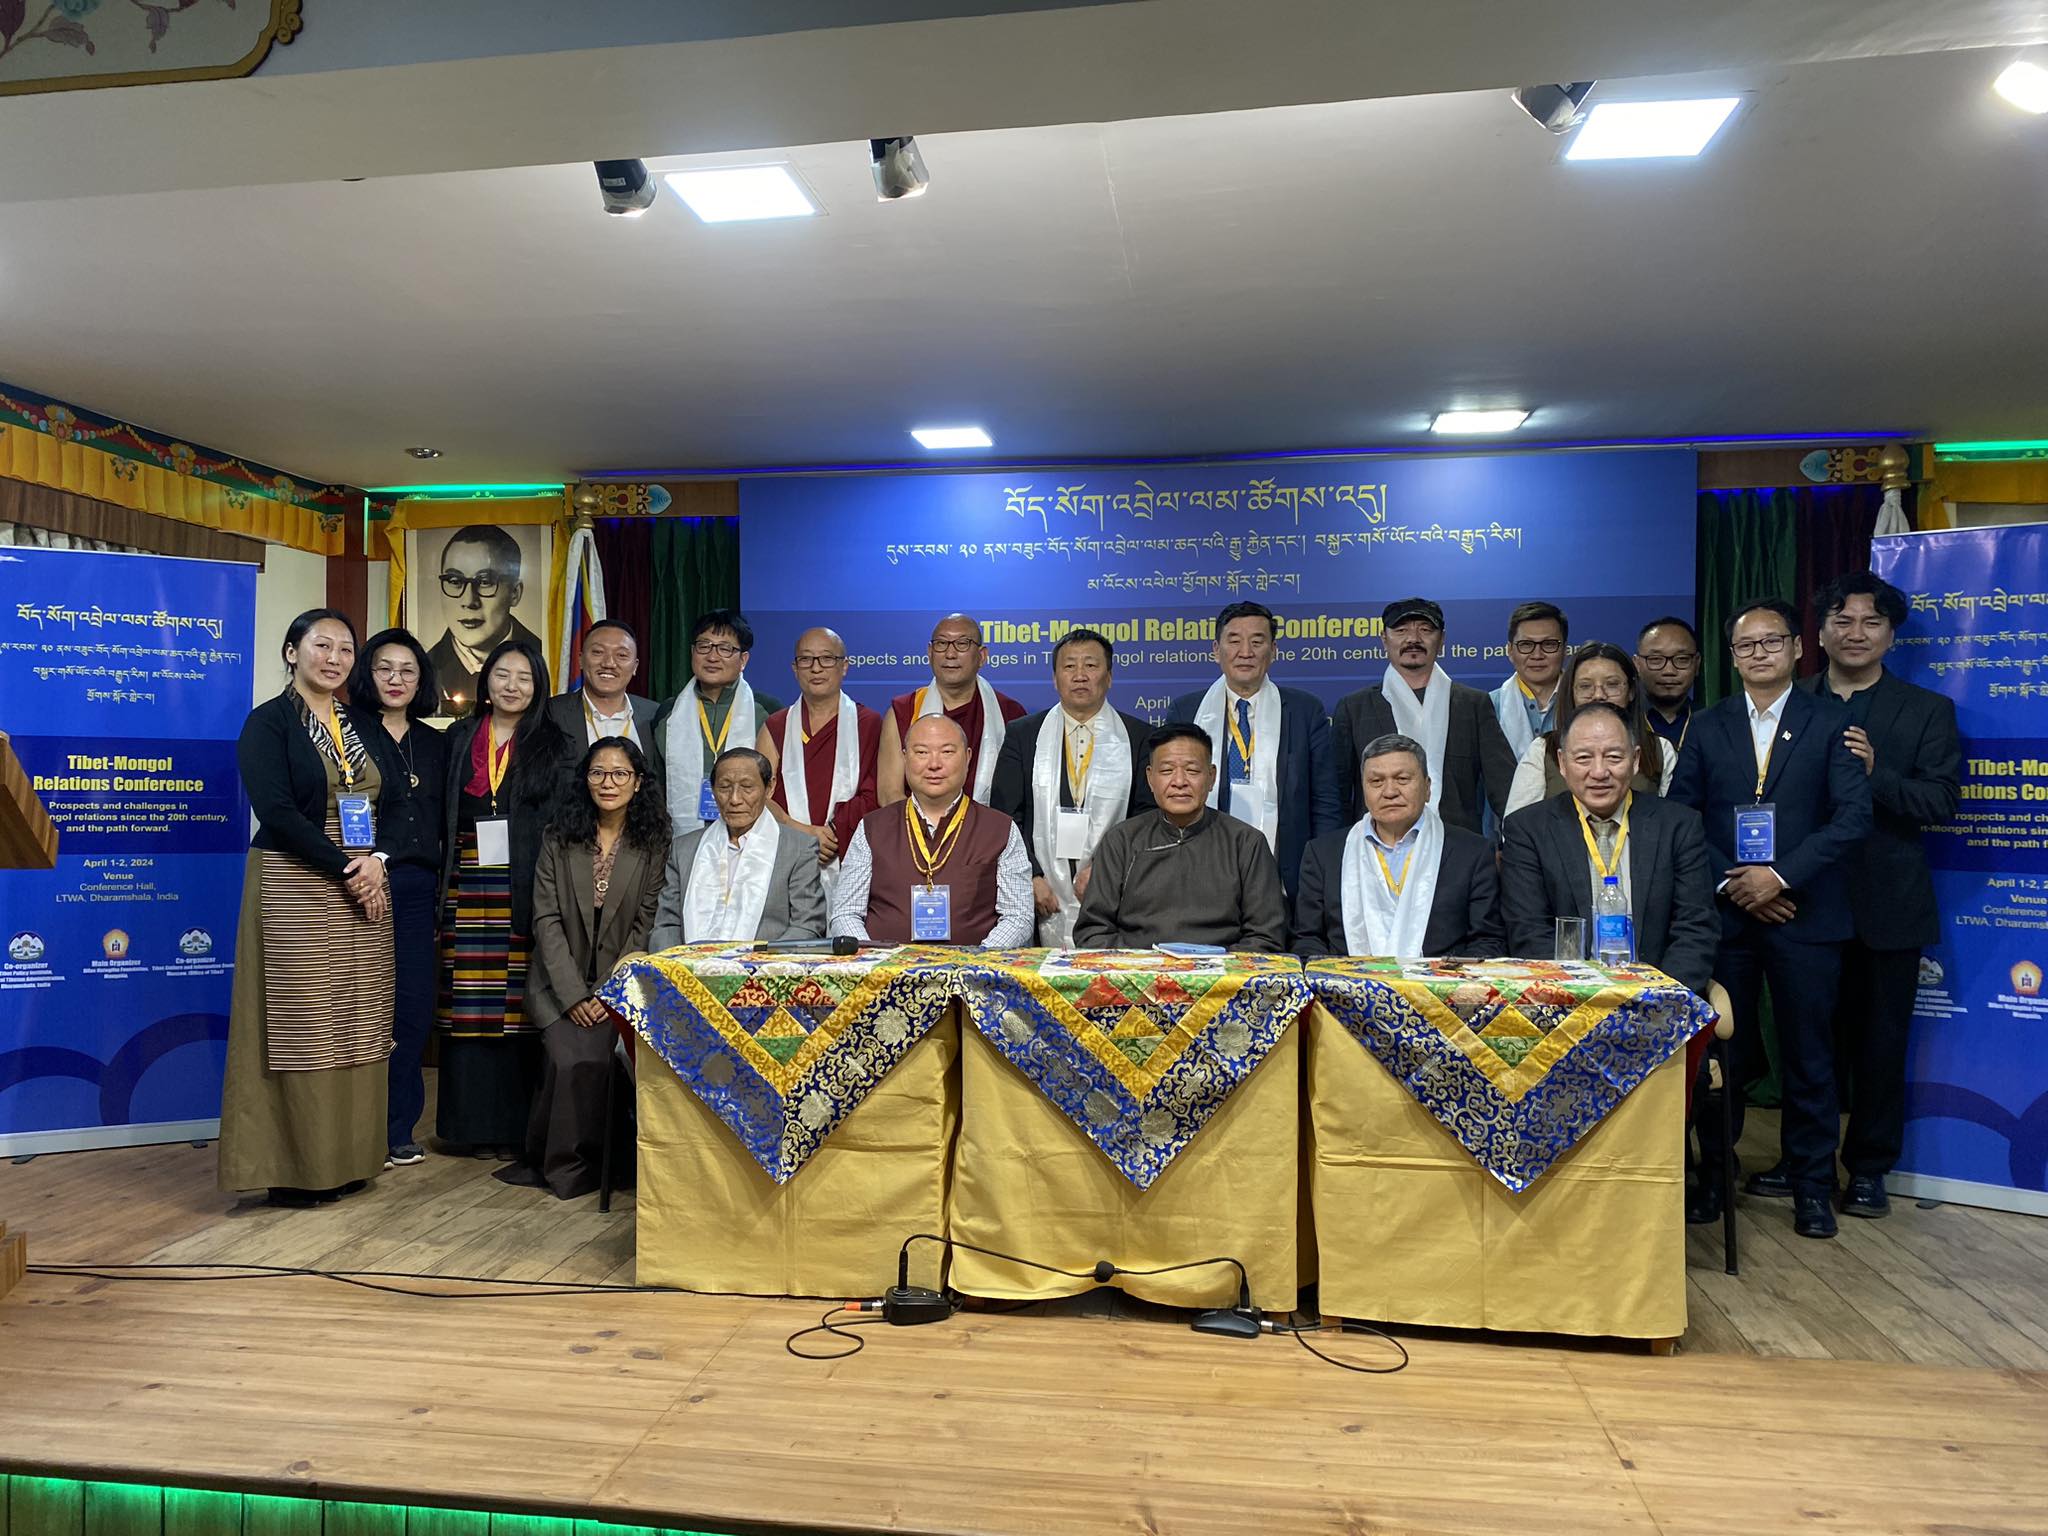 Tibet Mongol Relation Conference